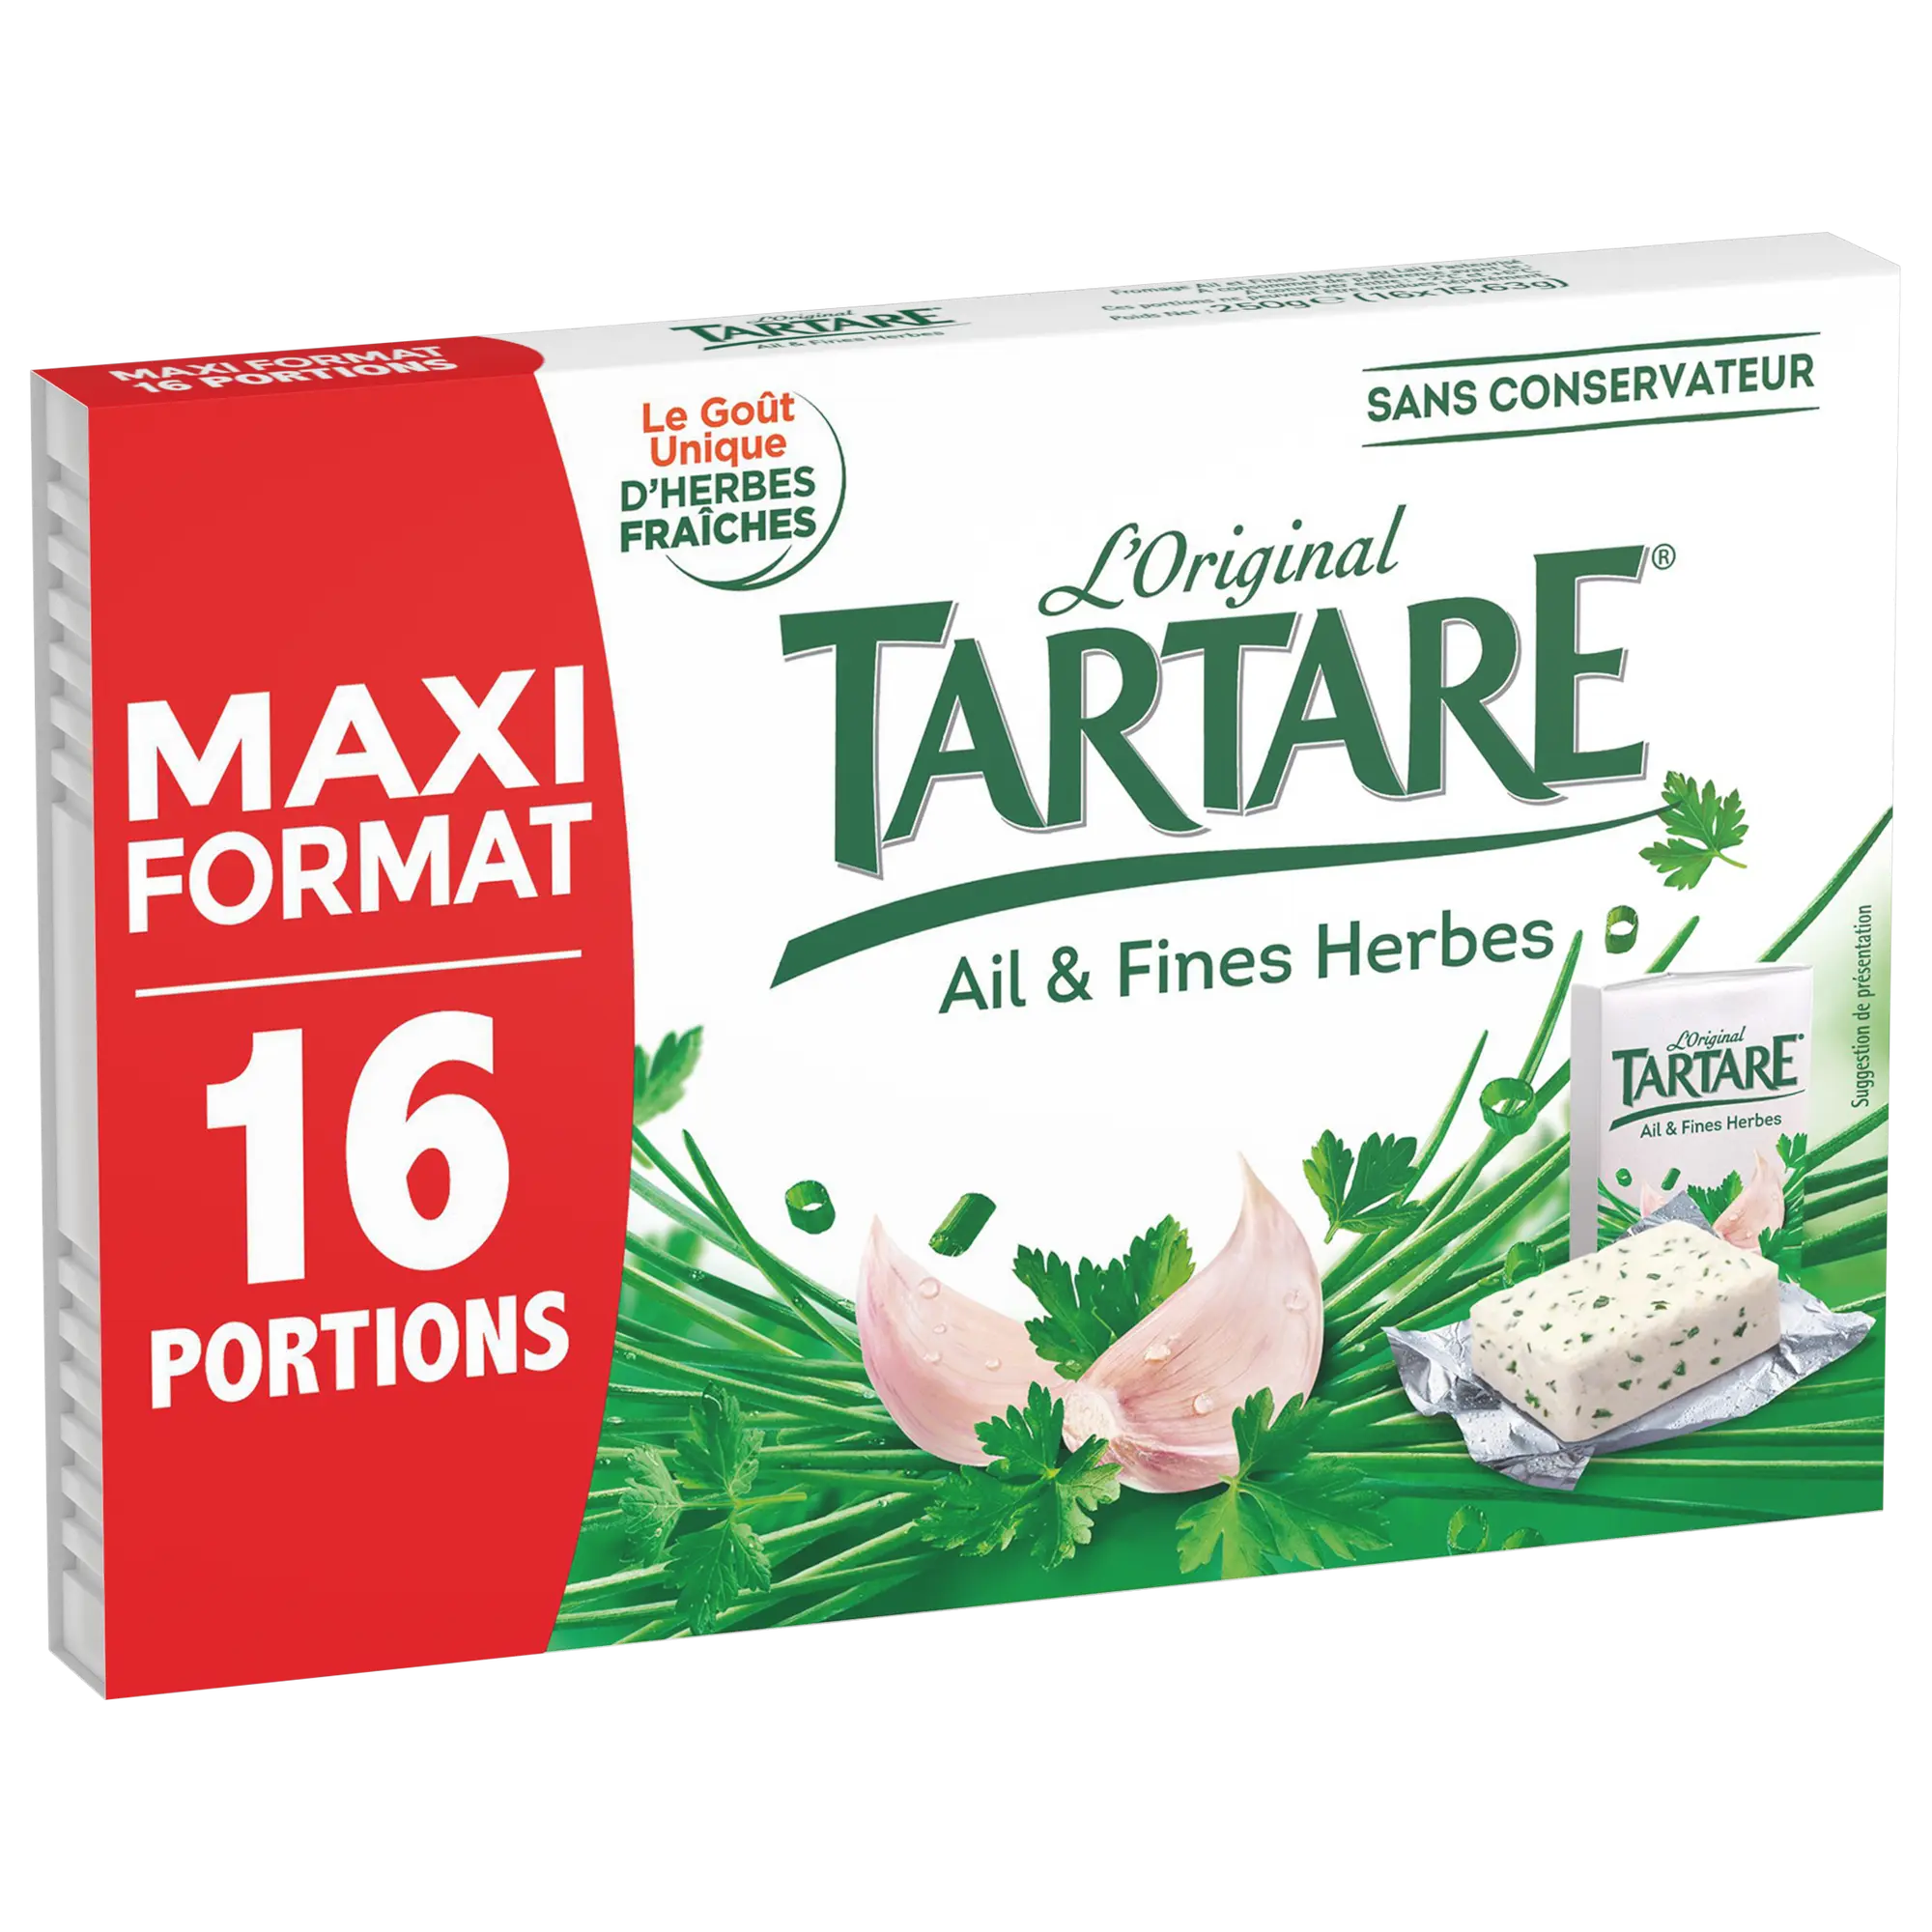 TARTARE® AIL & FINES HERBES 16 PORTIONS 250G